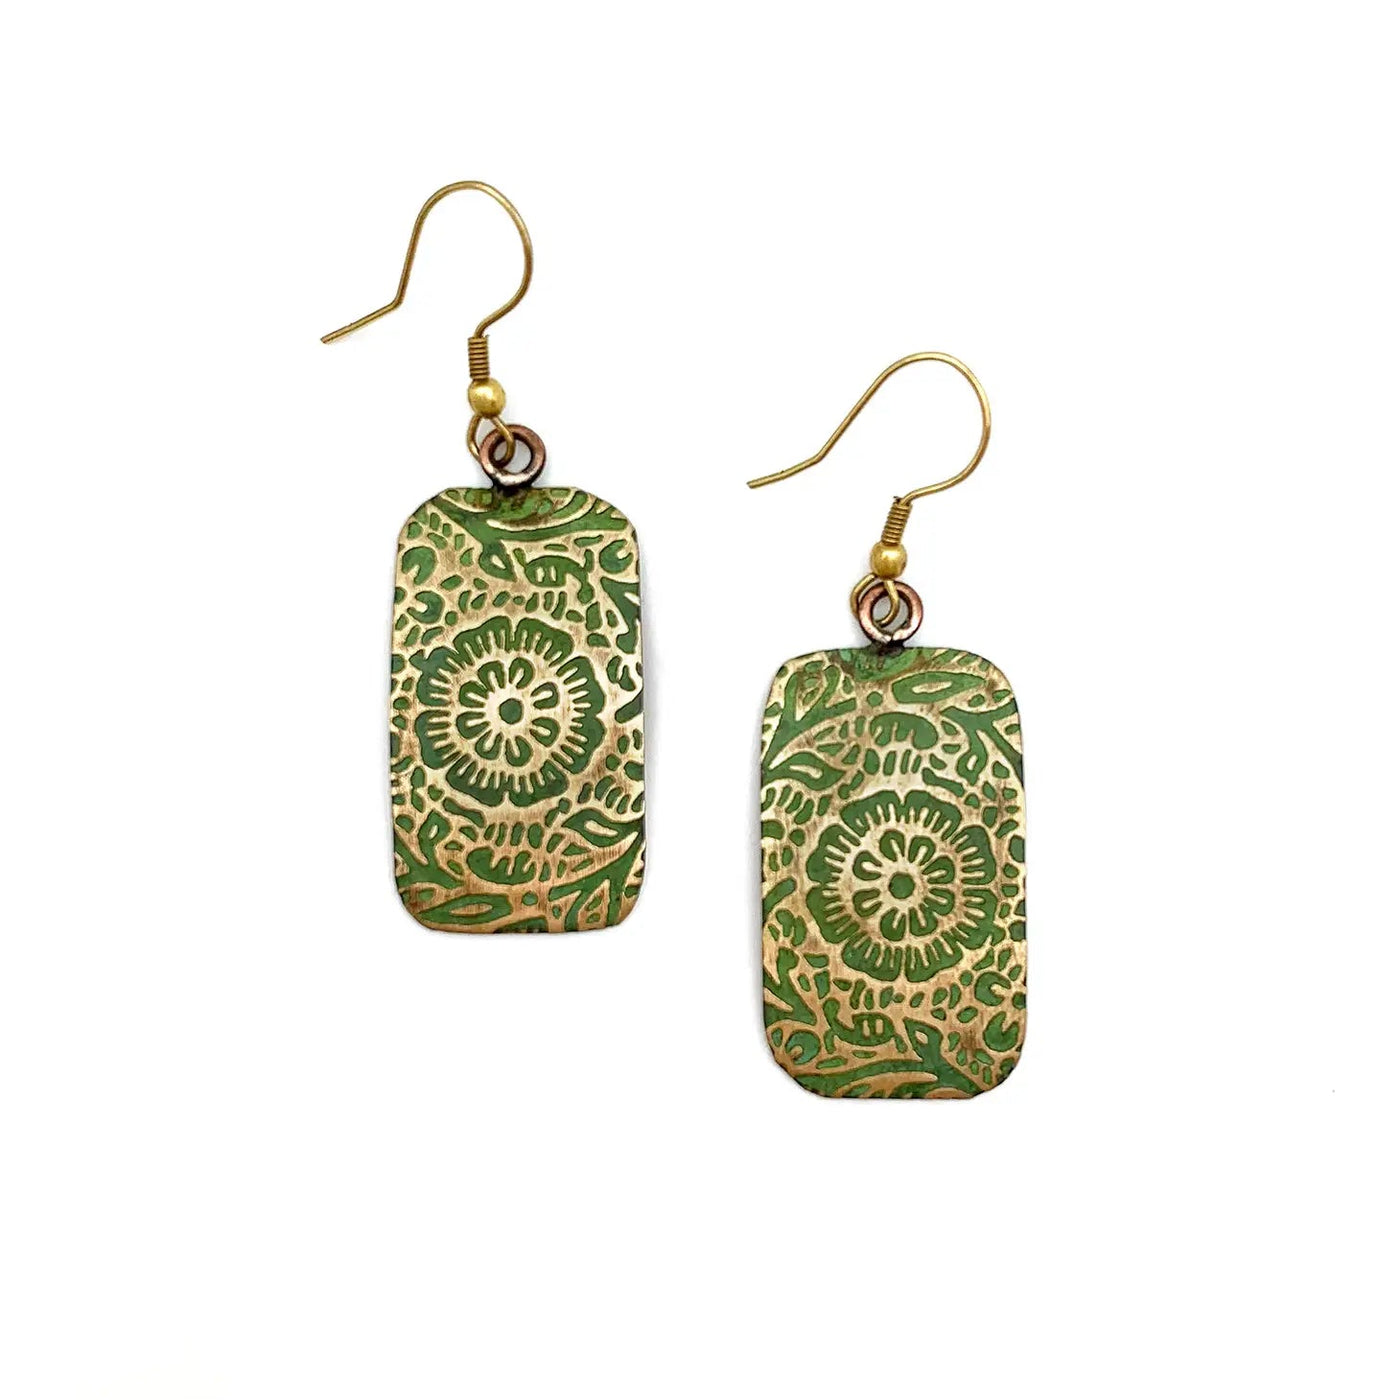 Brass Patina Earrings - Chartreuse Floral Scrollwork - Blue Sky Fashions & Lingerie